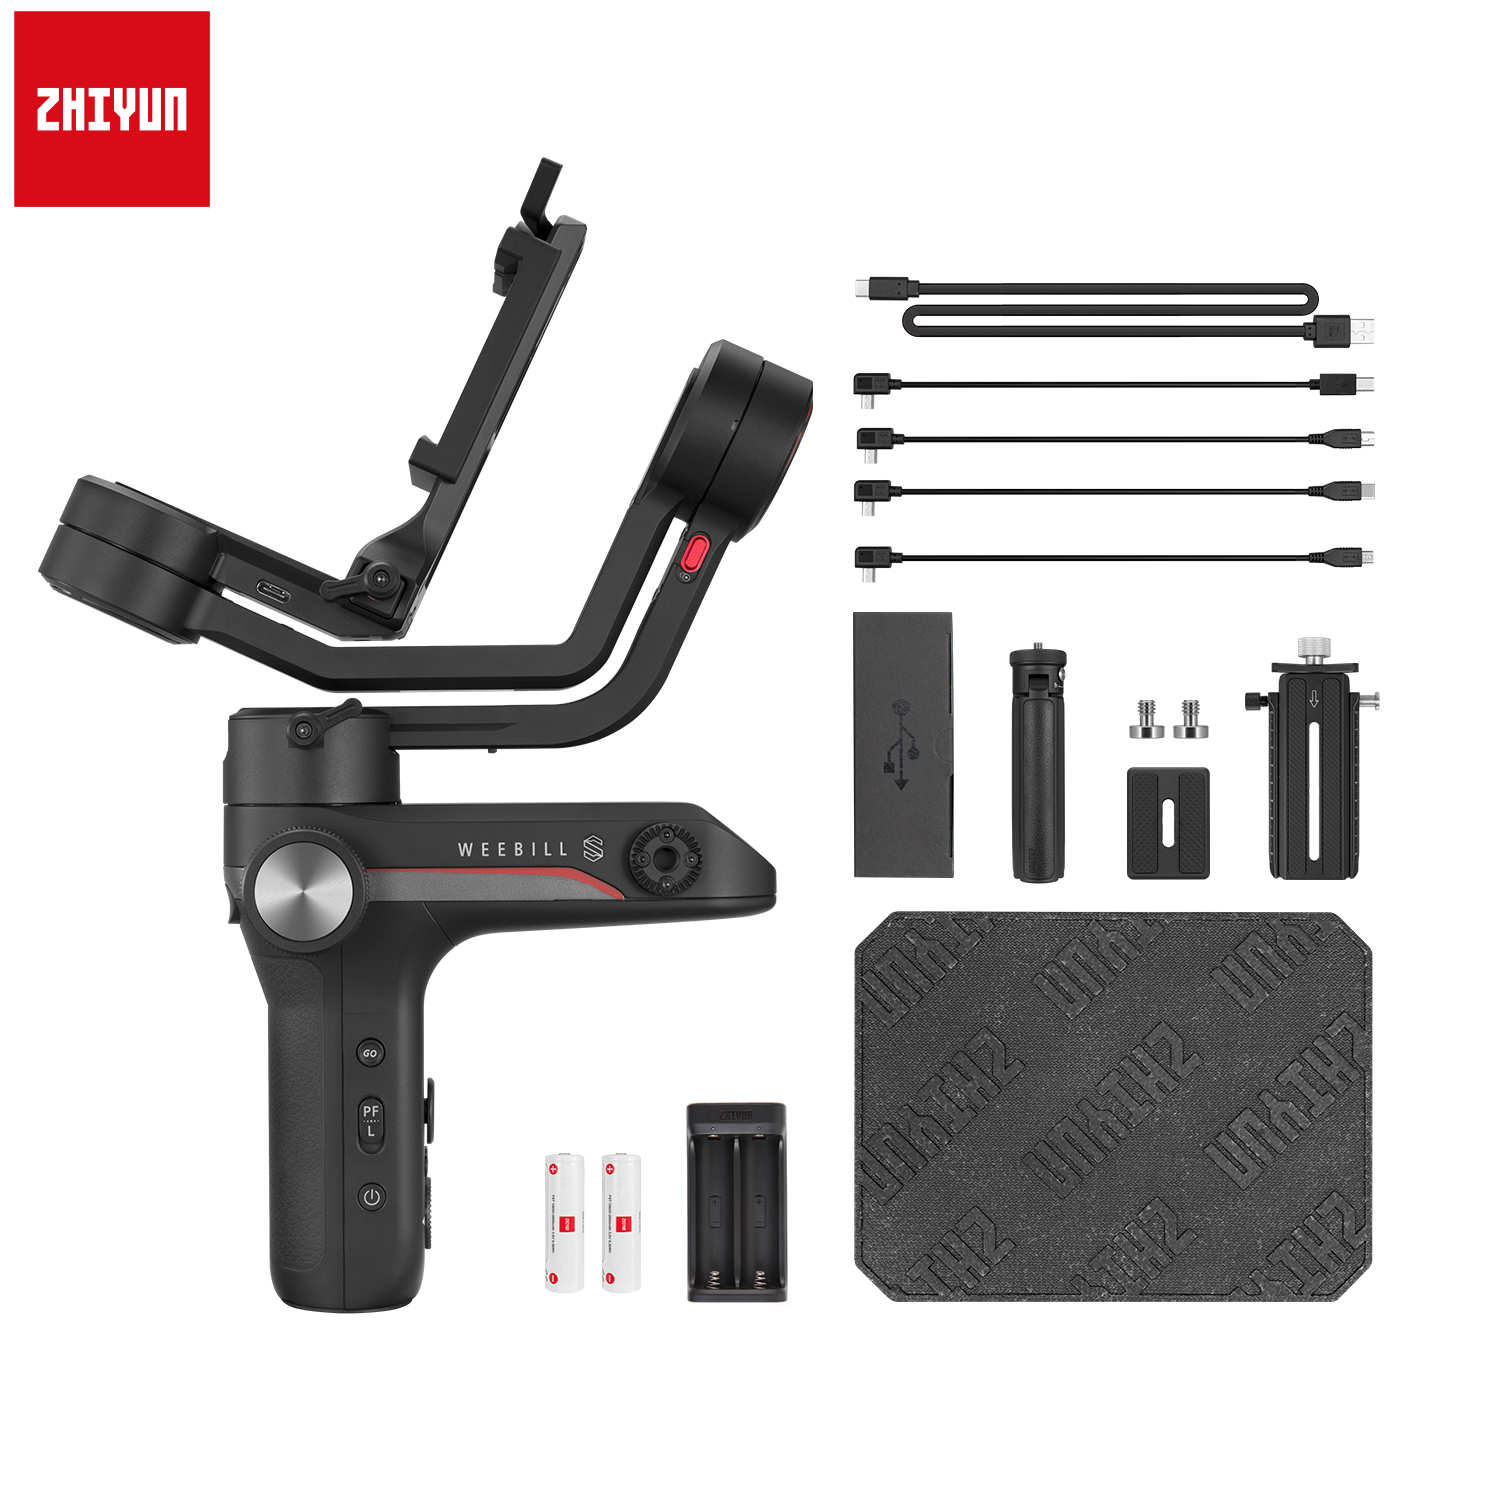 Zhiyun Weebill S 3-Axis Handheld Gimbal Stabilizer OLED Display for Sony A3III A7M3 for Canon EOS R Z6 Z7 S1 Mirrorless Camera